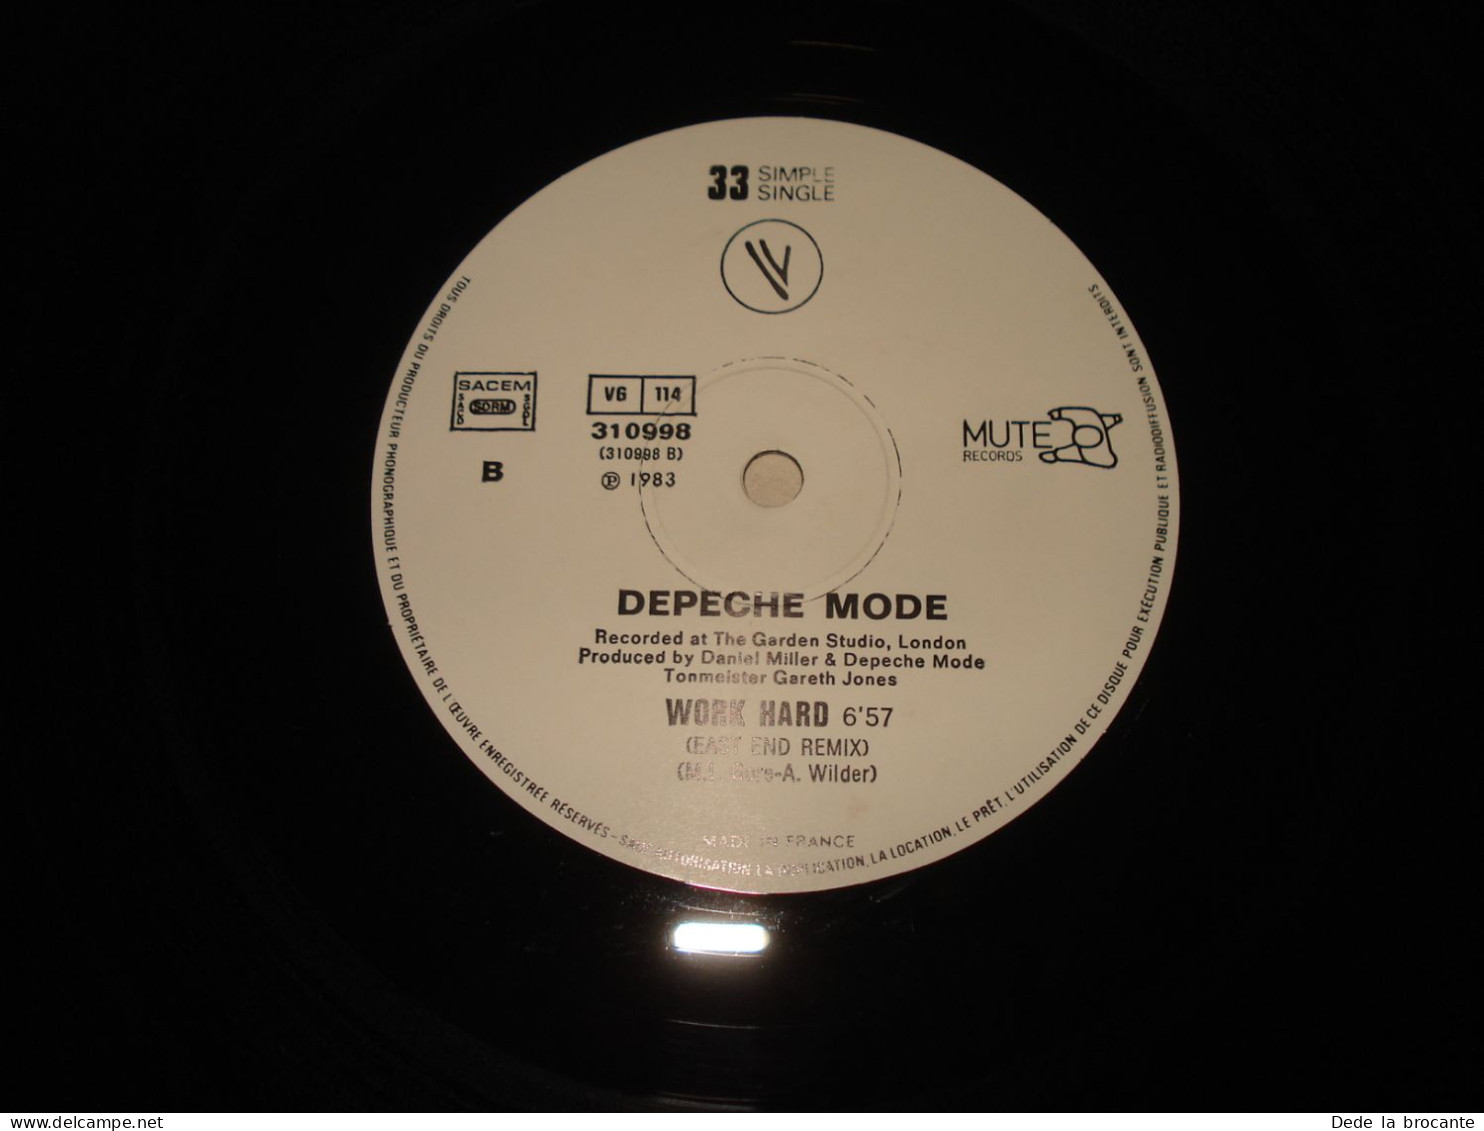 B12 / Depeche Mode – Everything Counts –Maxi Single - Mute - 310998 - FR 1983  NM/NM - Formati Speciali